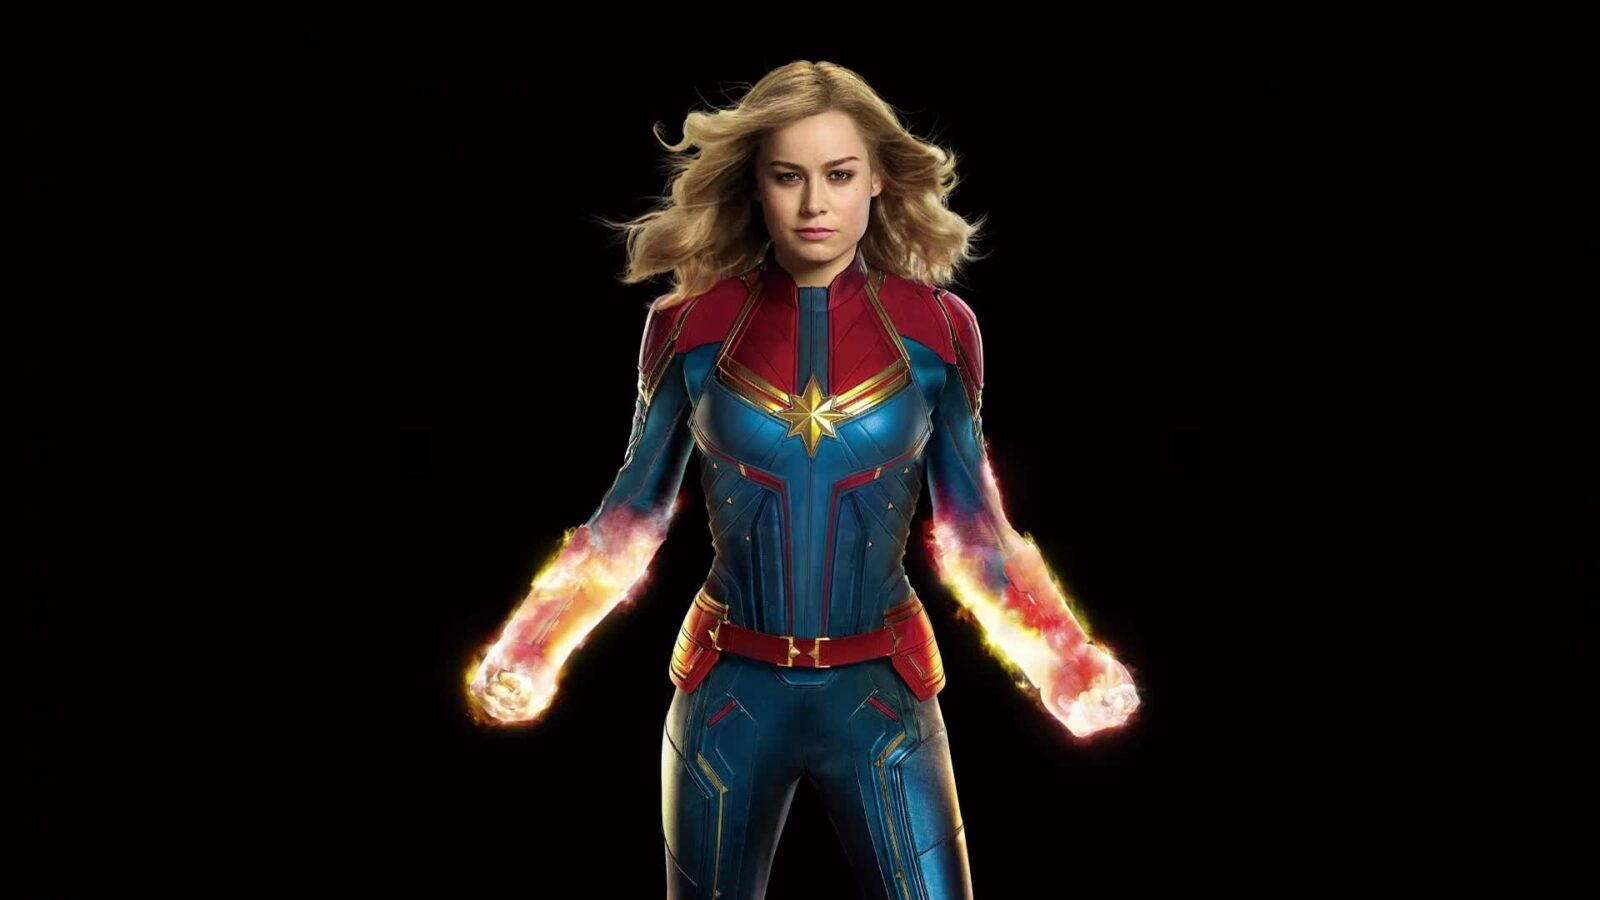 LiveWallpapers4Free.com | Captain Marvel Hands On Fire - Free Live Wallpaper